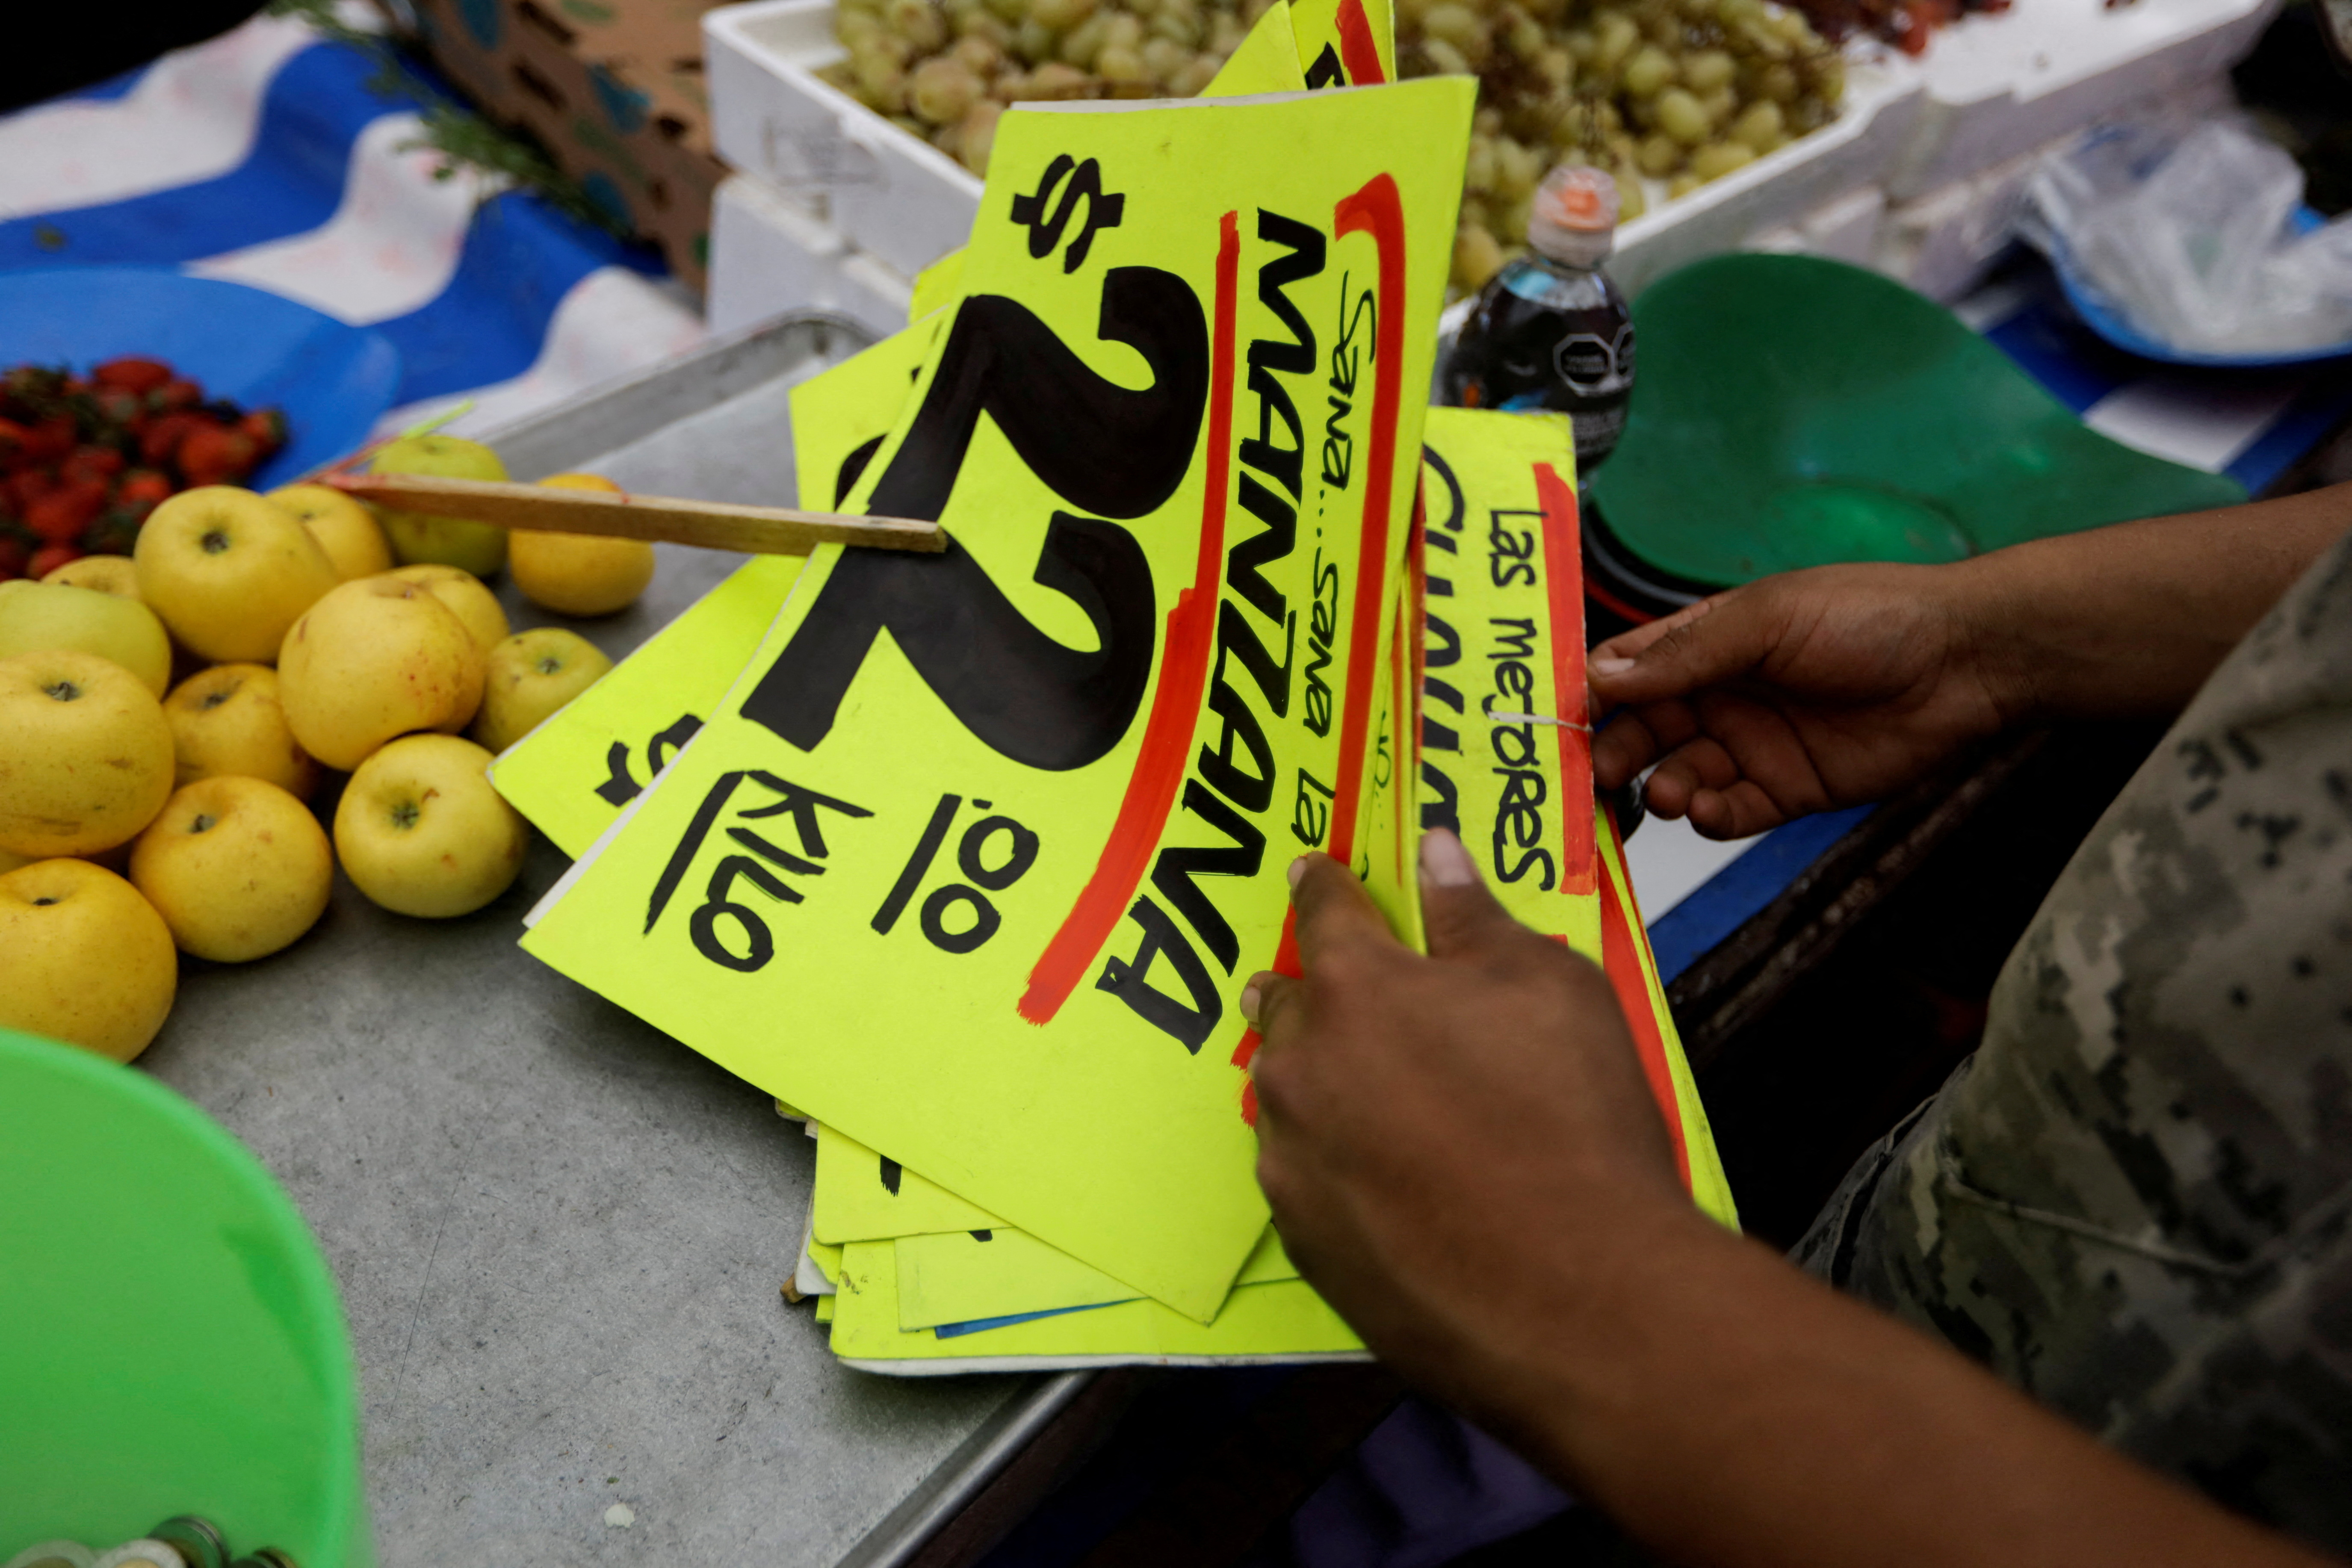 A vendor arranges signs displaying the prices of fruits in his stall at a street market, in Mexico City